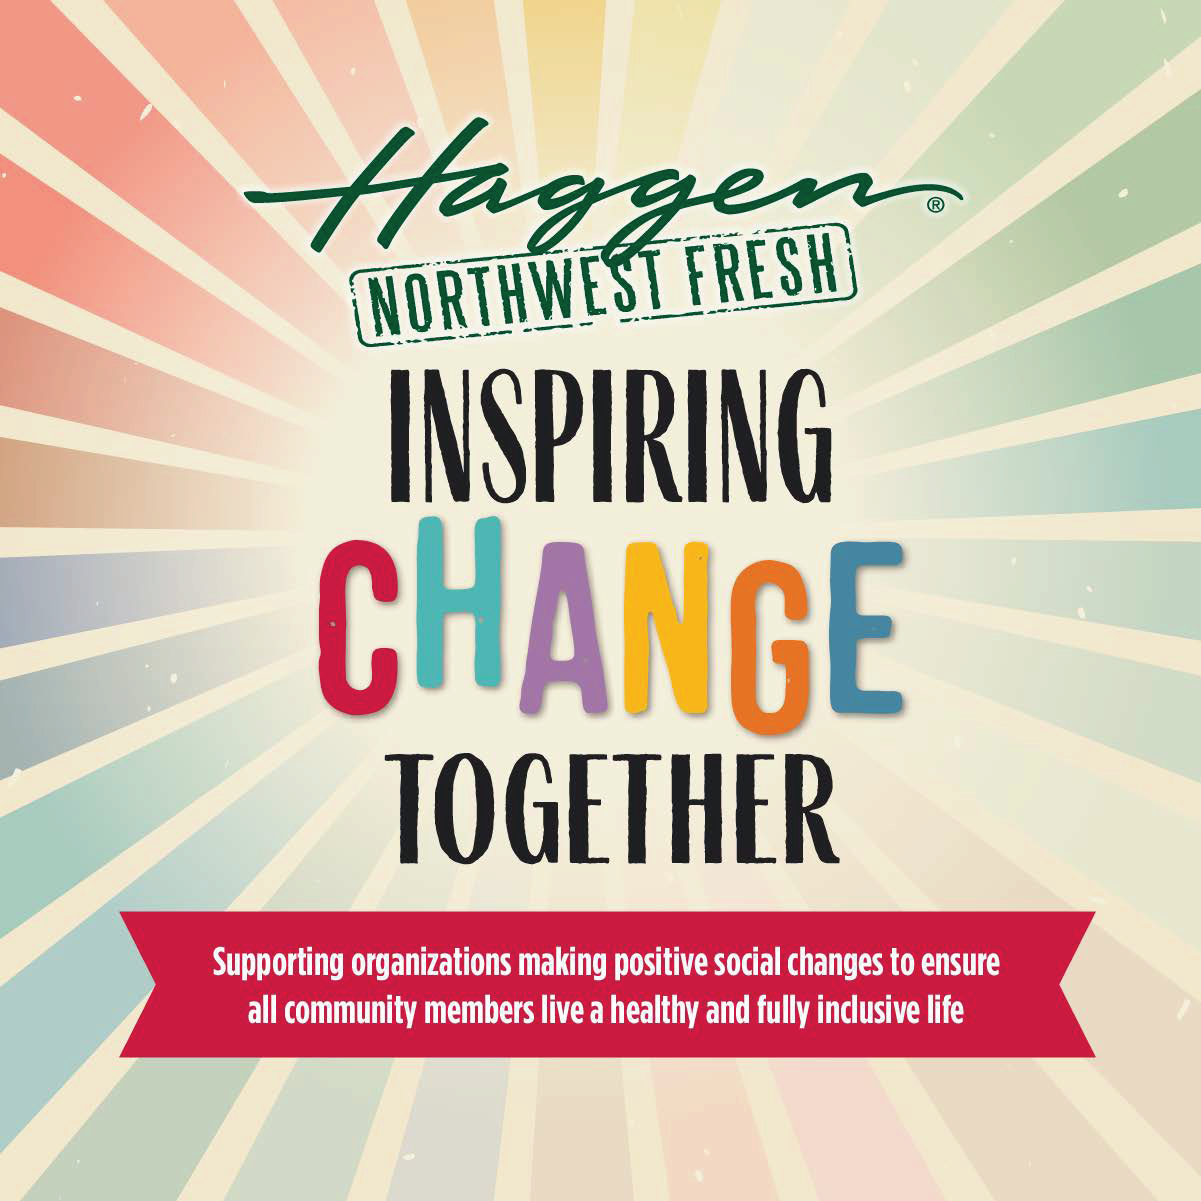 Image with a background of radiating, muted colorful rays. At the top is the green logo for "Haggen: Northwest Fresh." In the center, black and colorful text say "Inspiring Change Together."